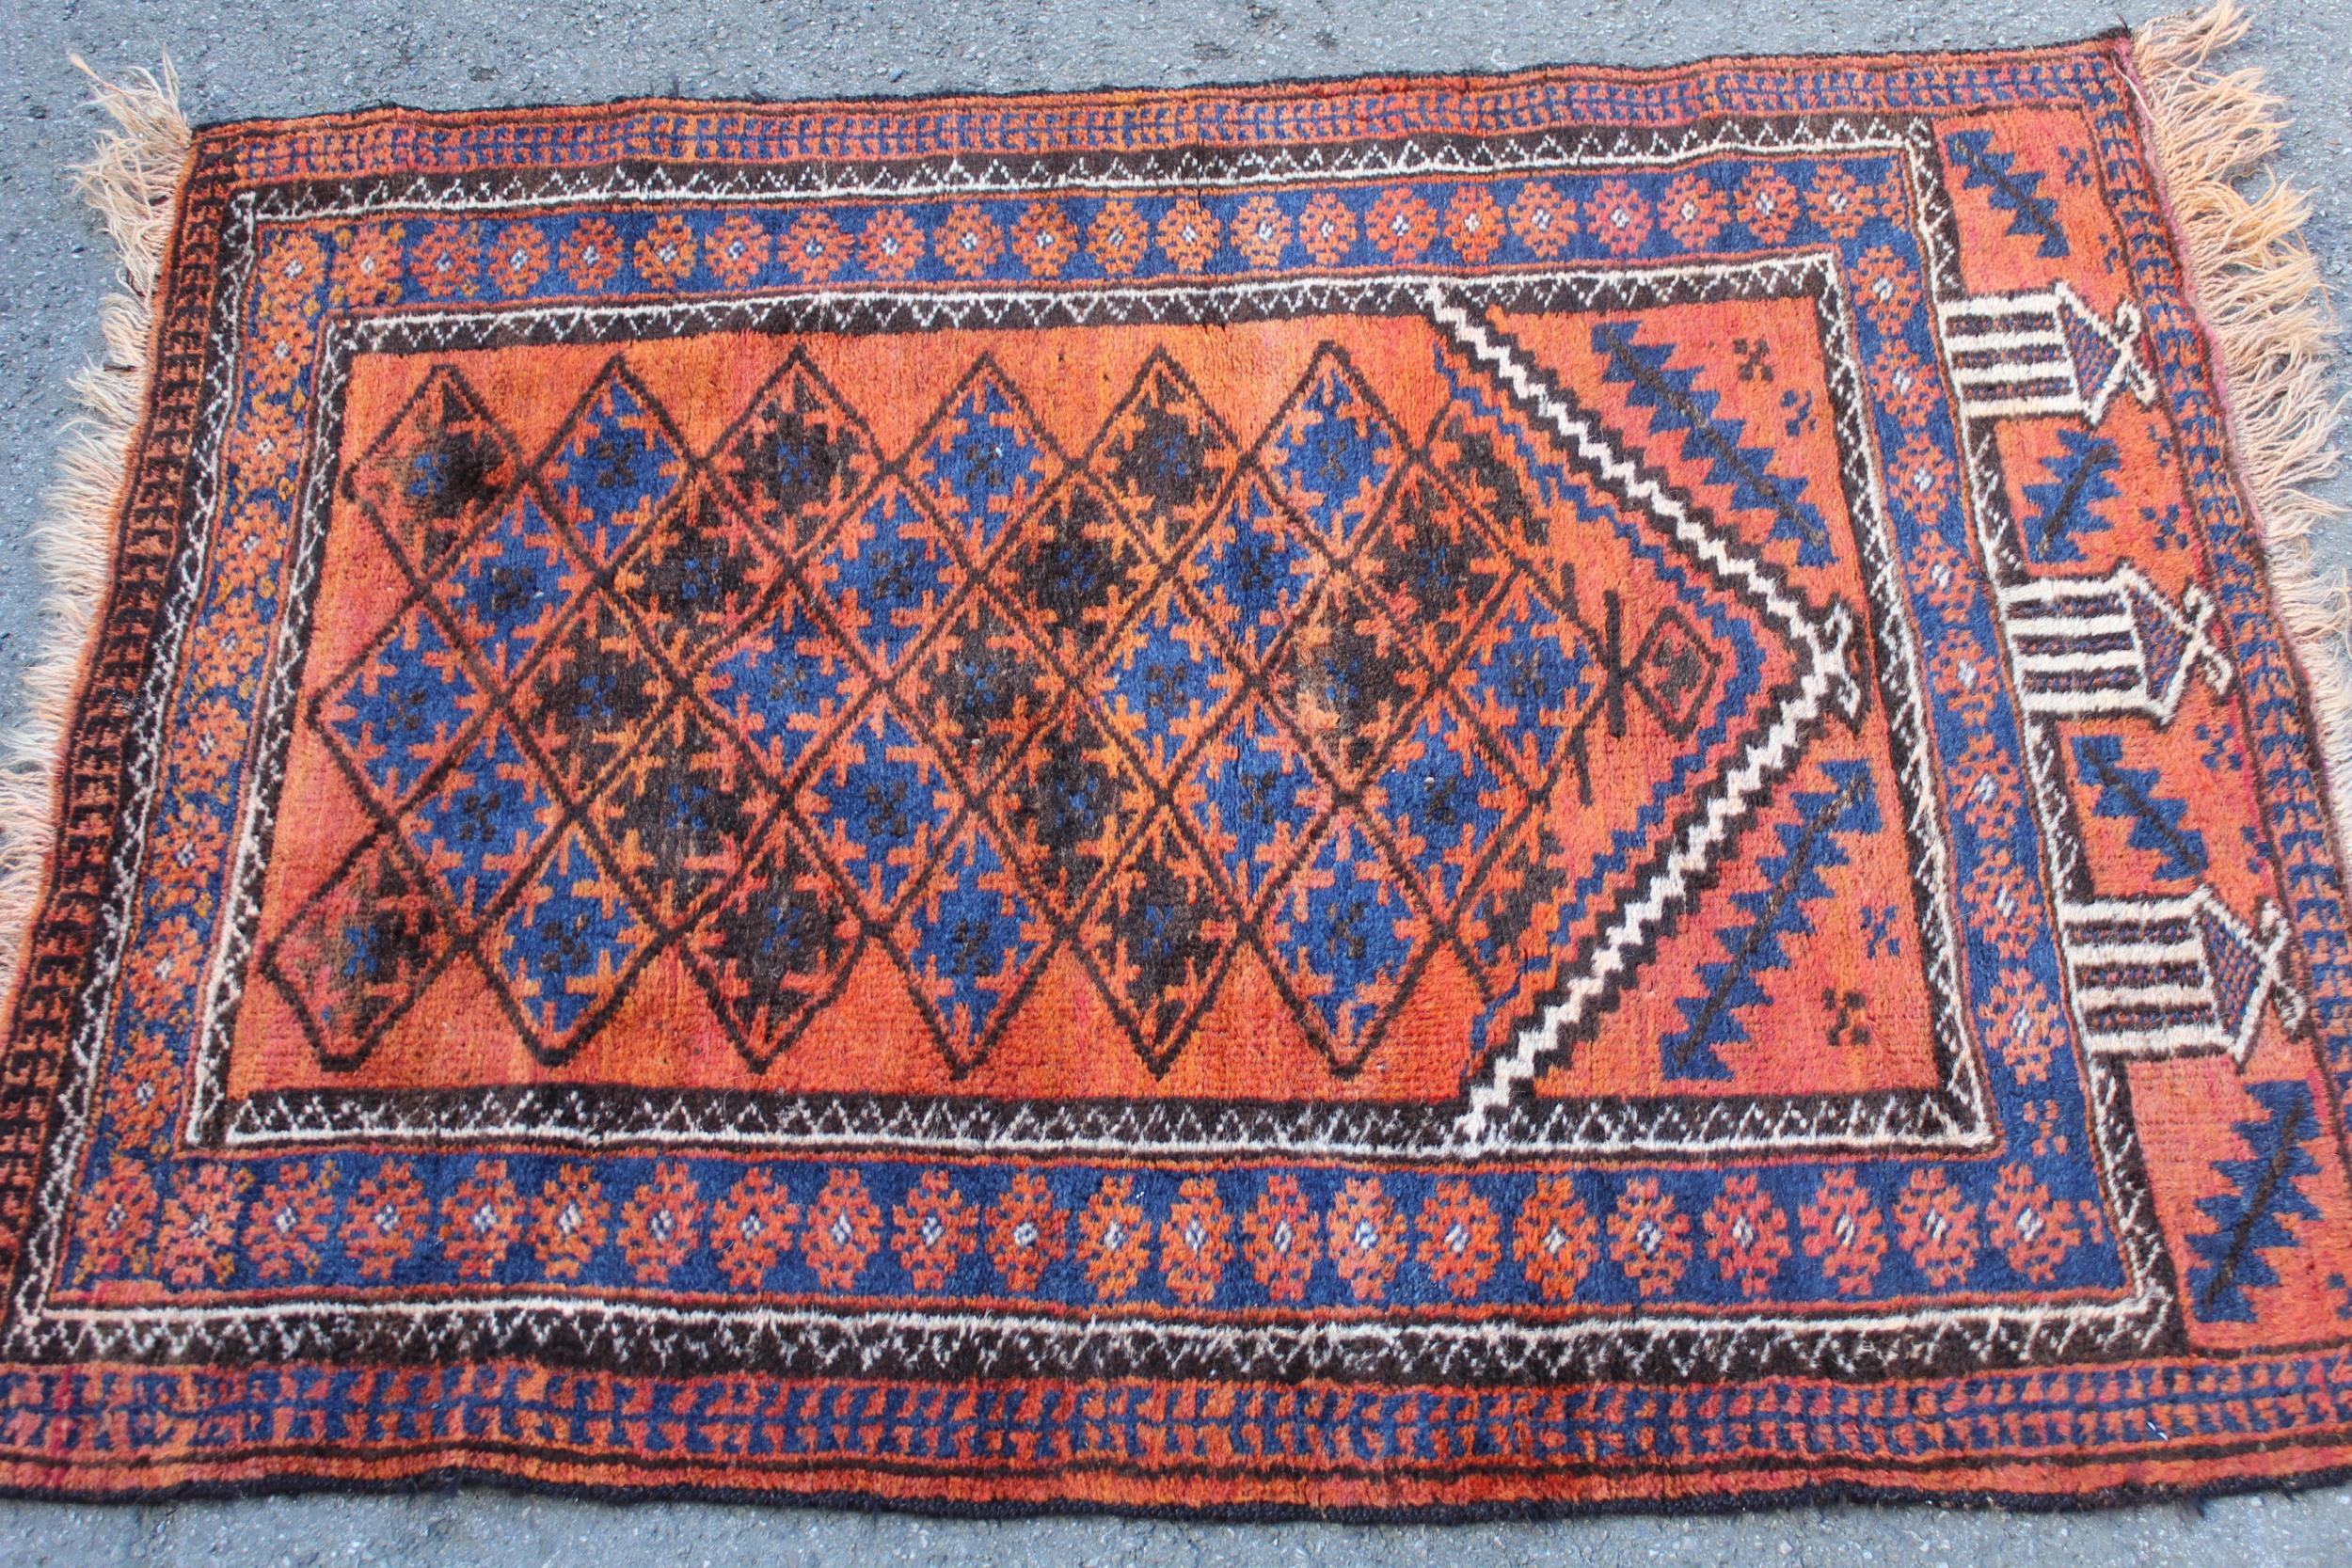 Small Afghan prayer rug, 3ft 8ins x 2ft 8ins approximately